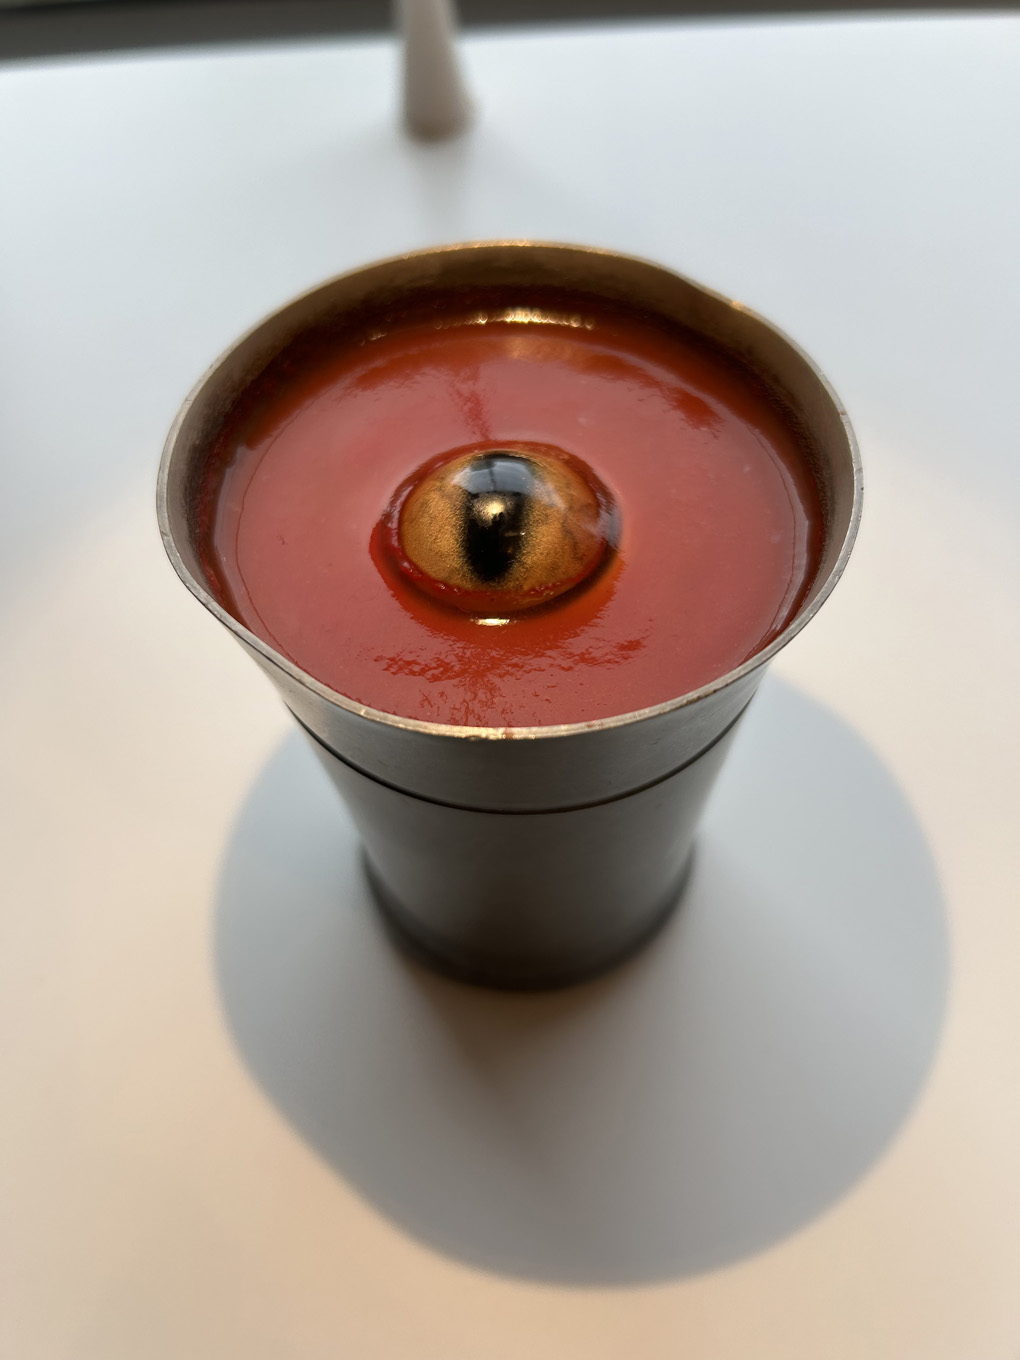 An eye floating in red tomato juice